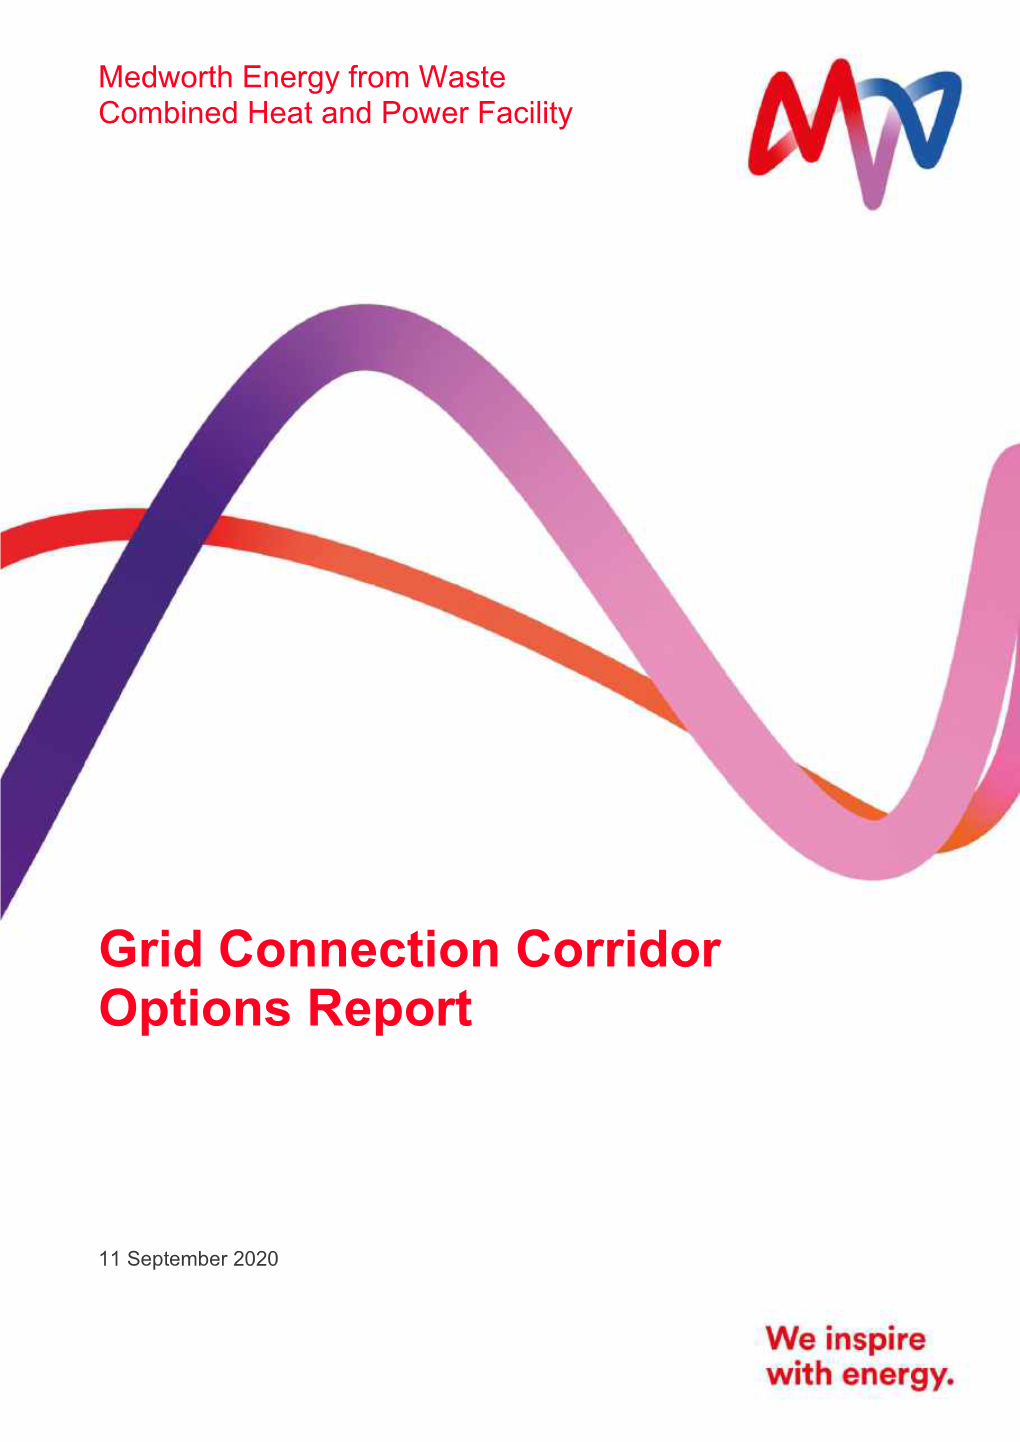 Grid Connection Corridor Options Report